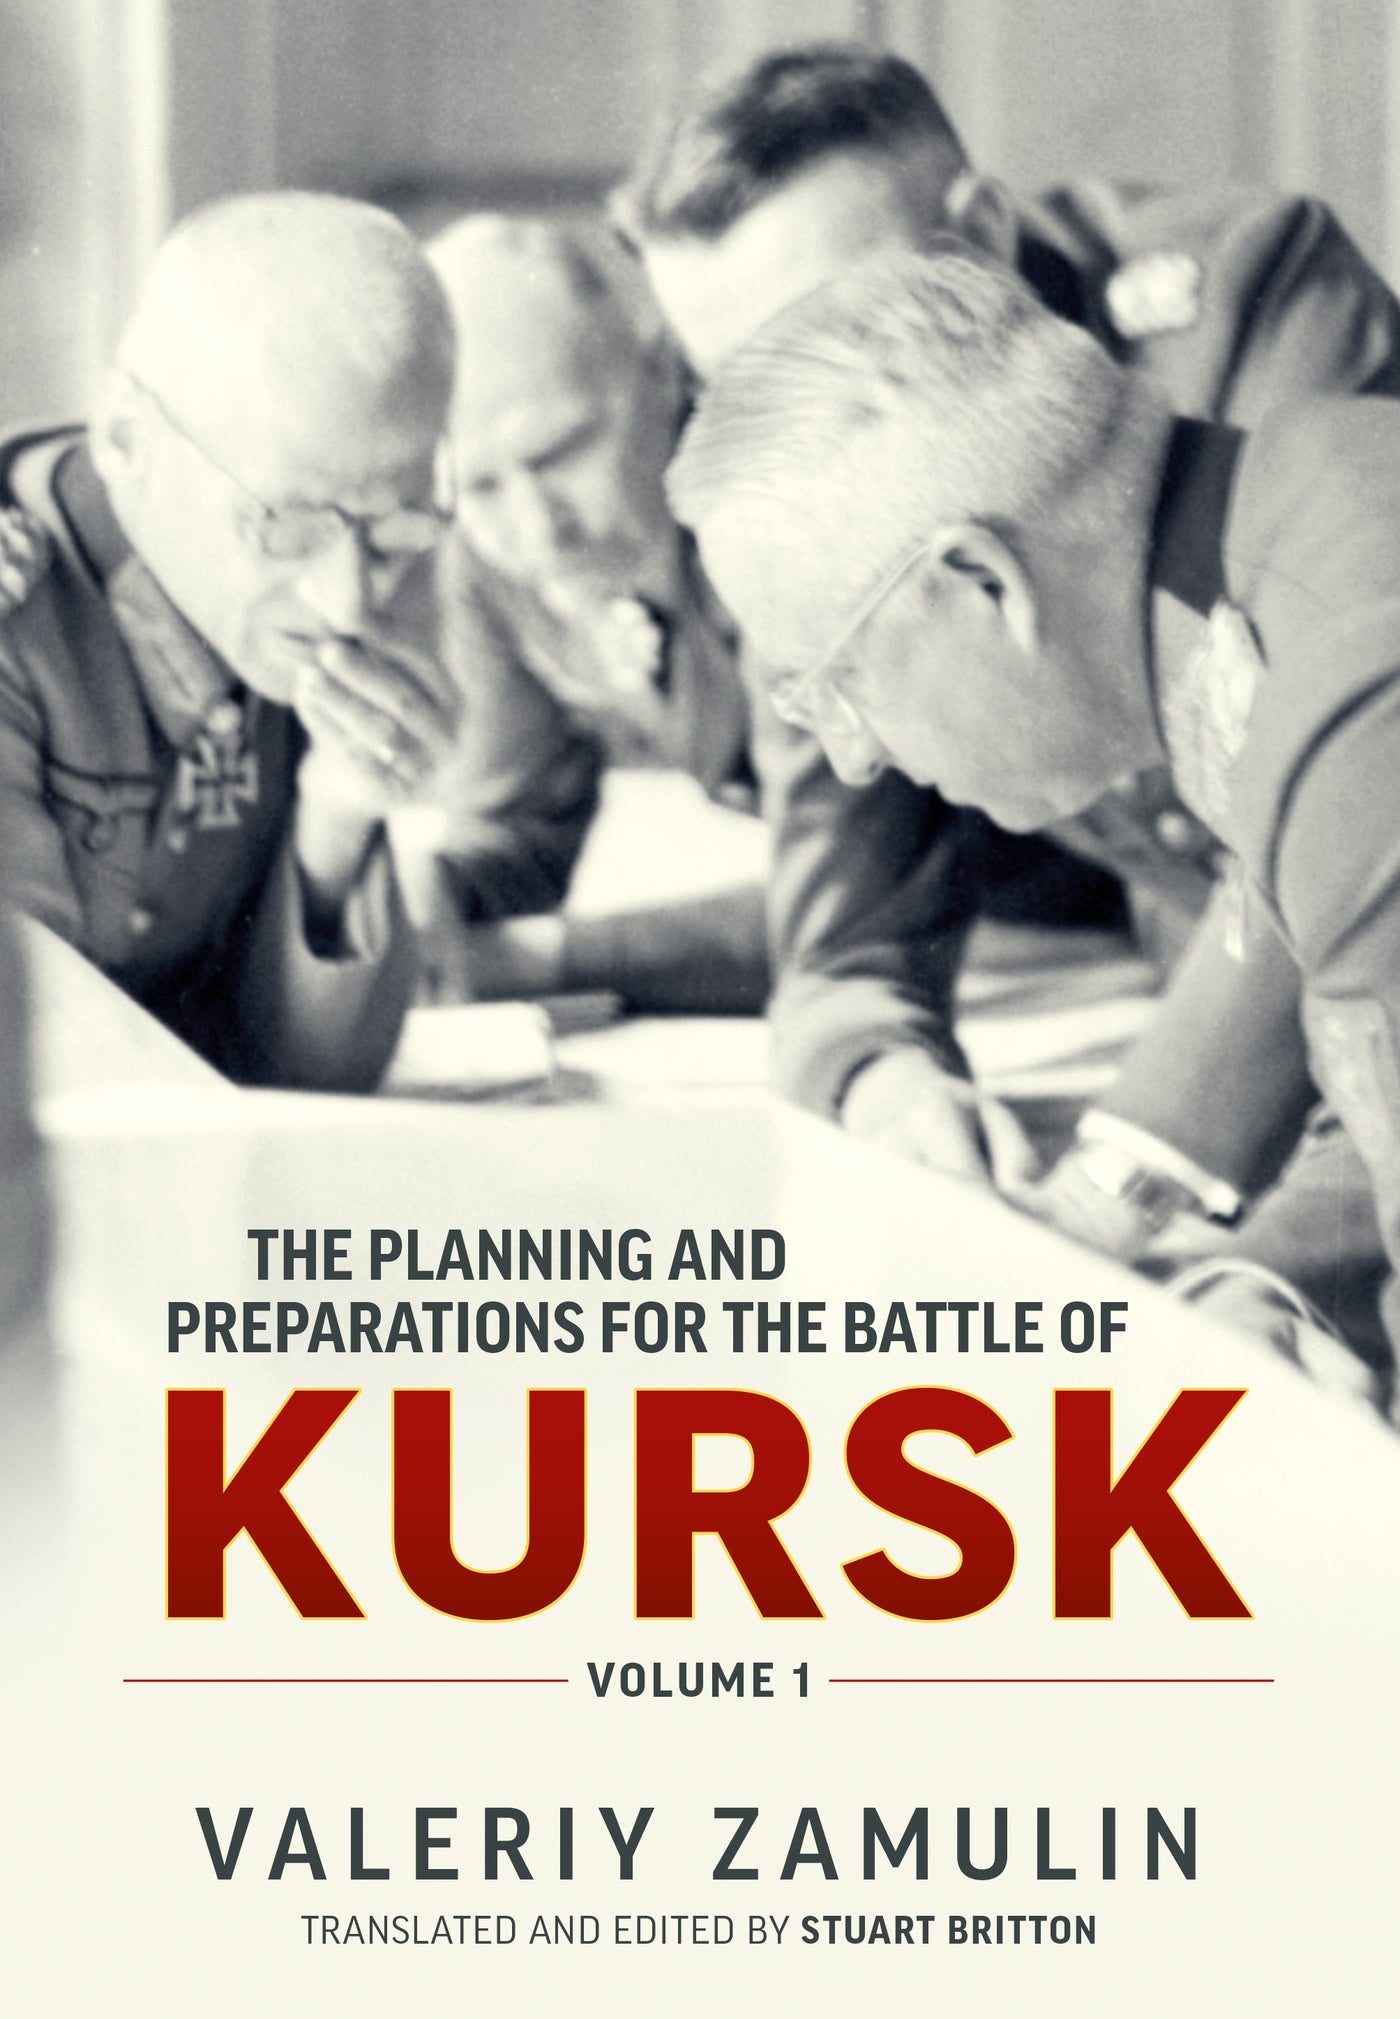 The Planning and Preparations for the Battle of Kursk, Volume 1